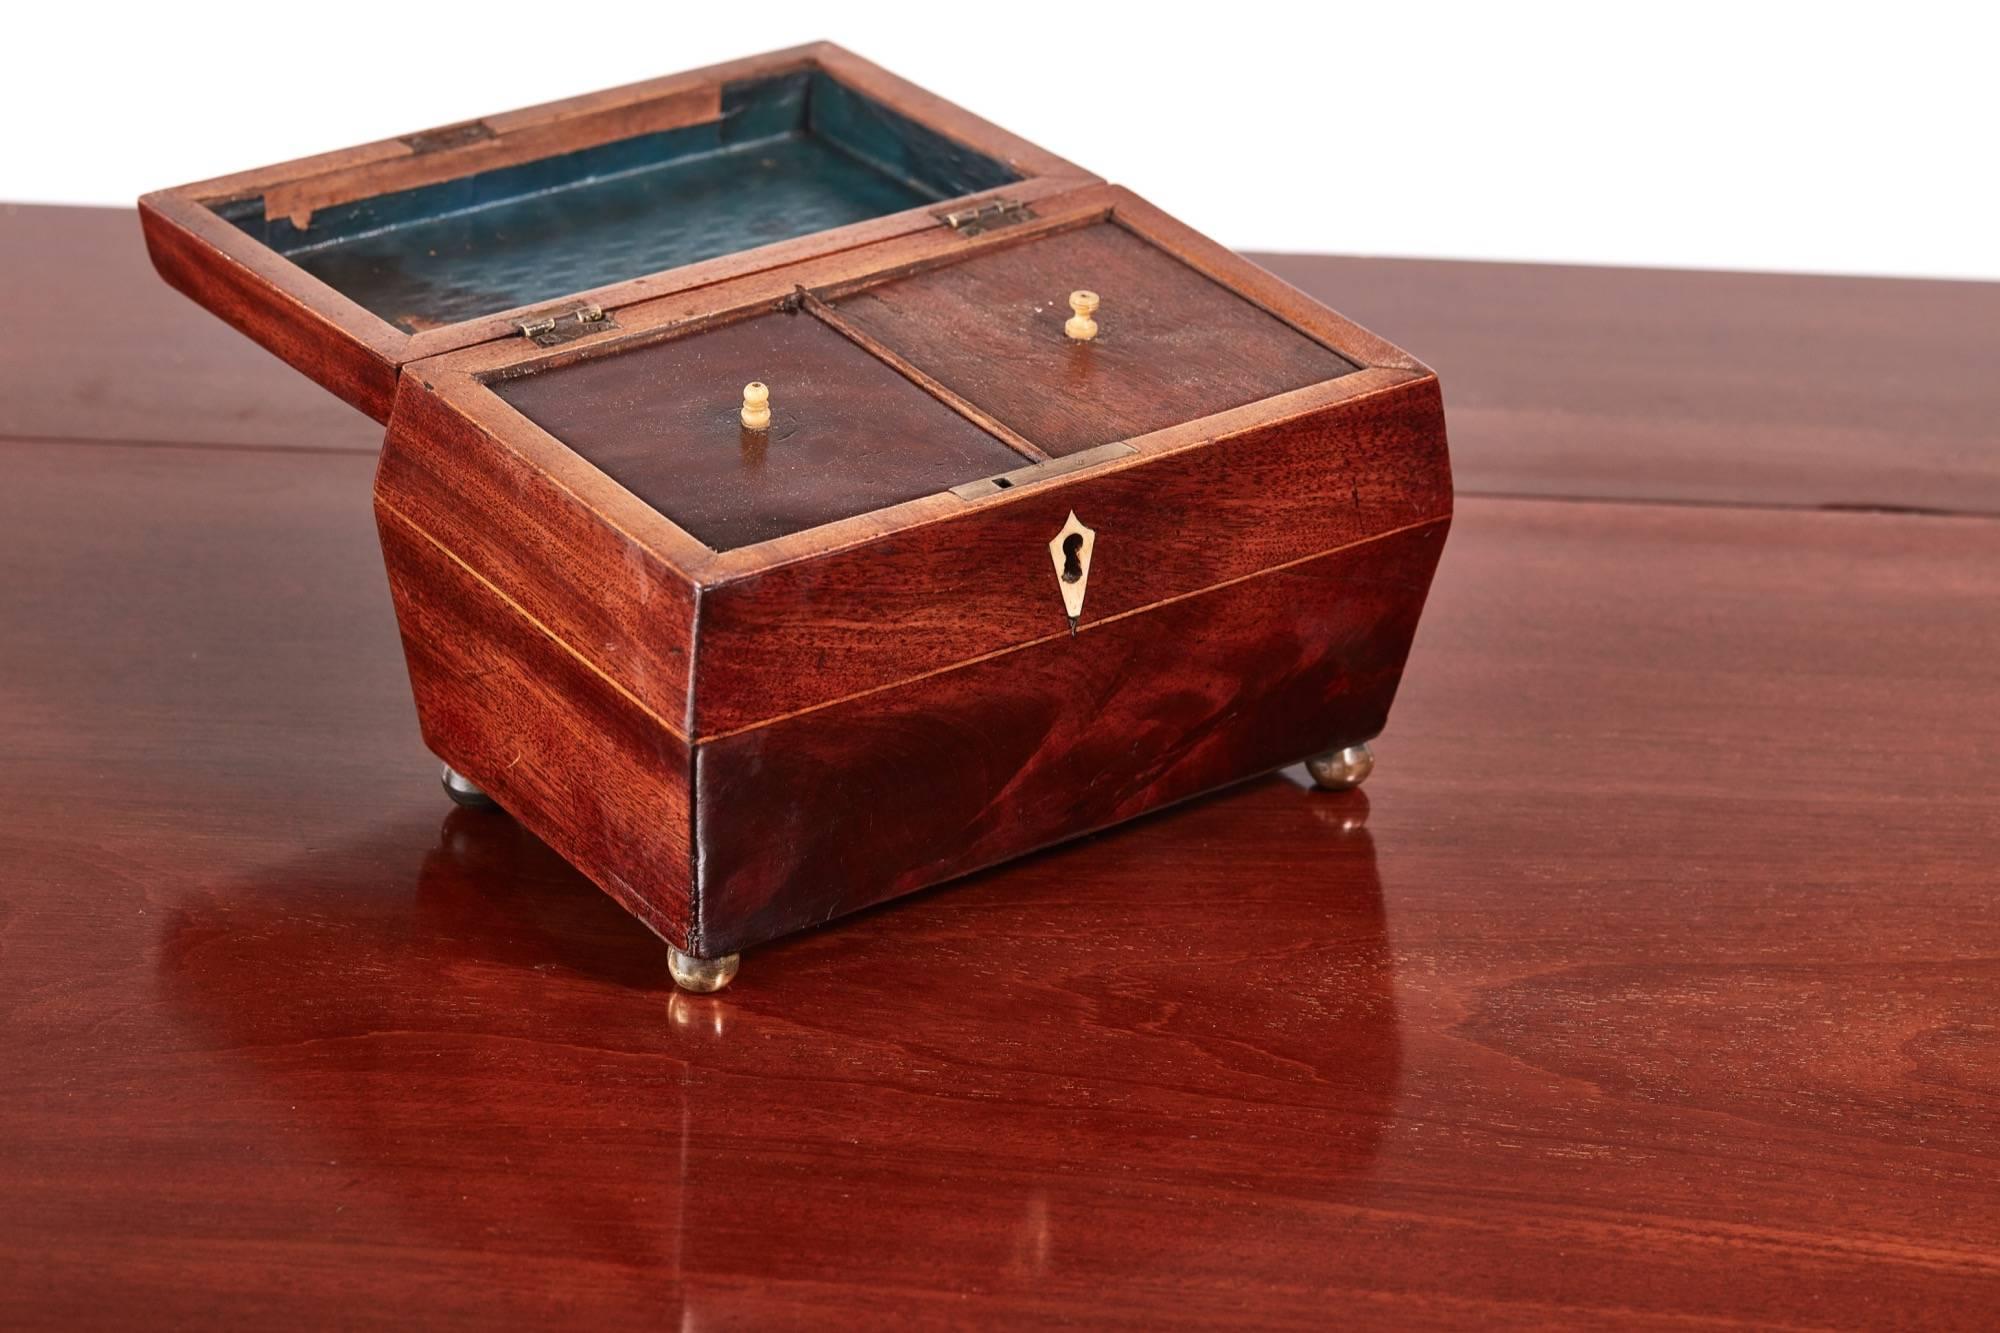 Antique mahogany sarcophagus shaped tea caddy, with a lift up lid, fitted interior, standing on original brass ball feet.